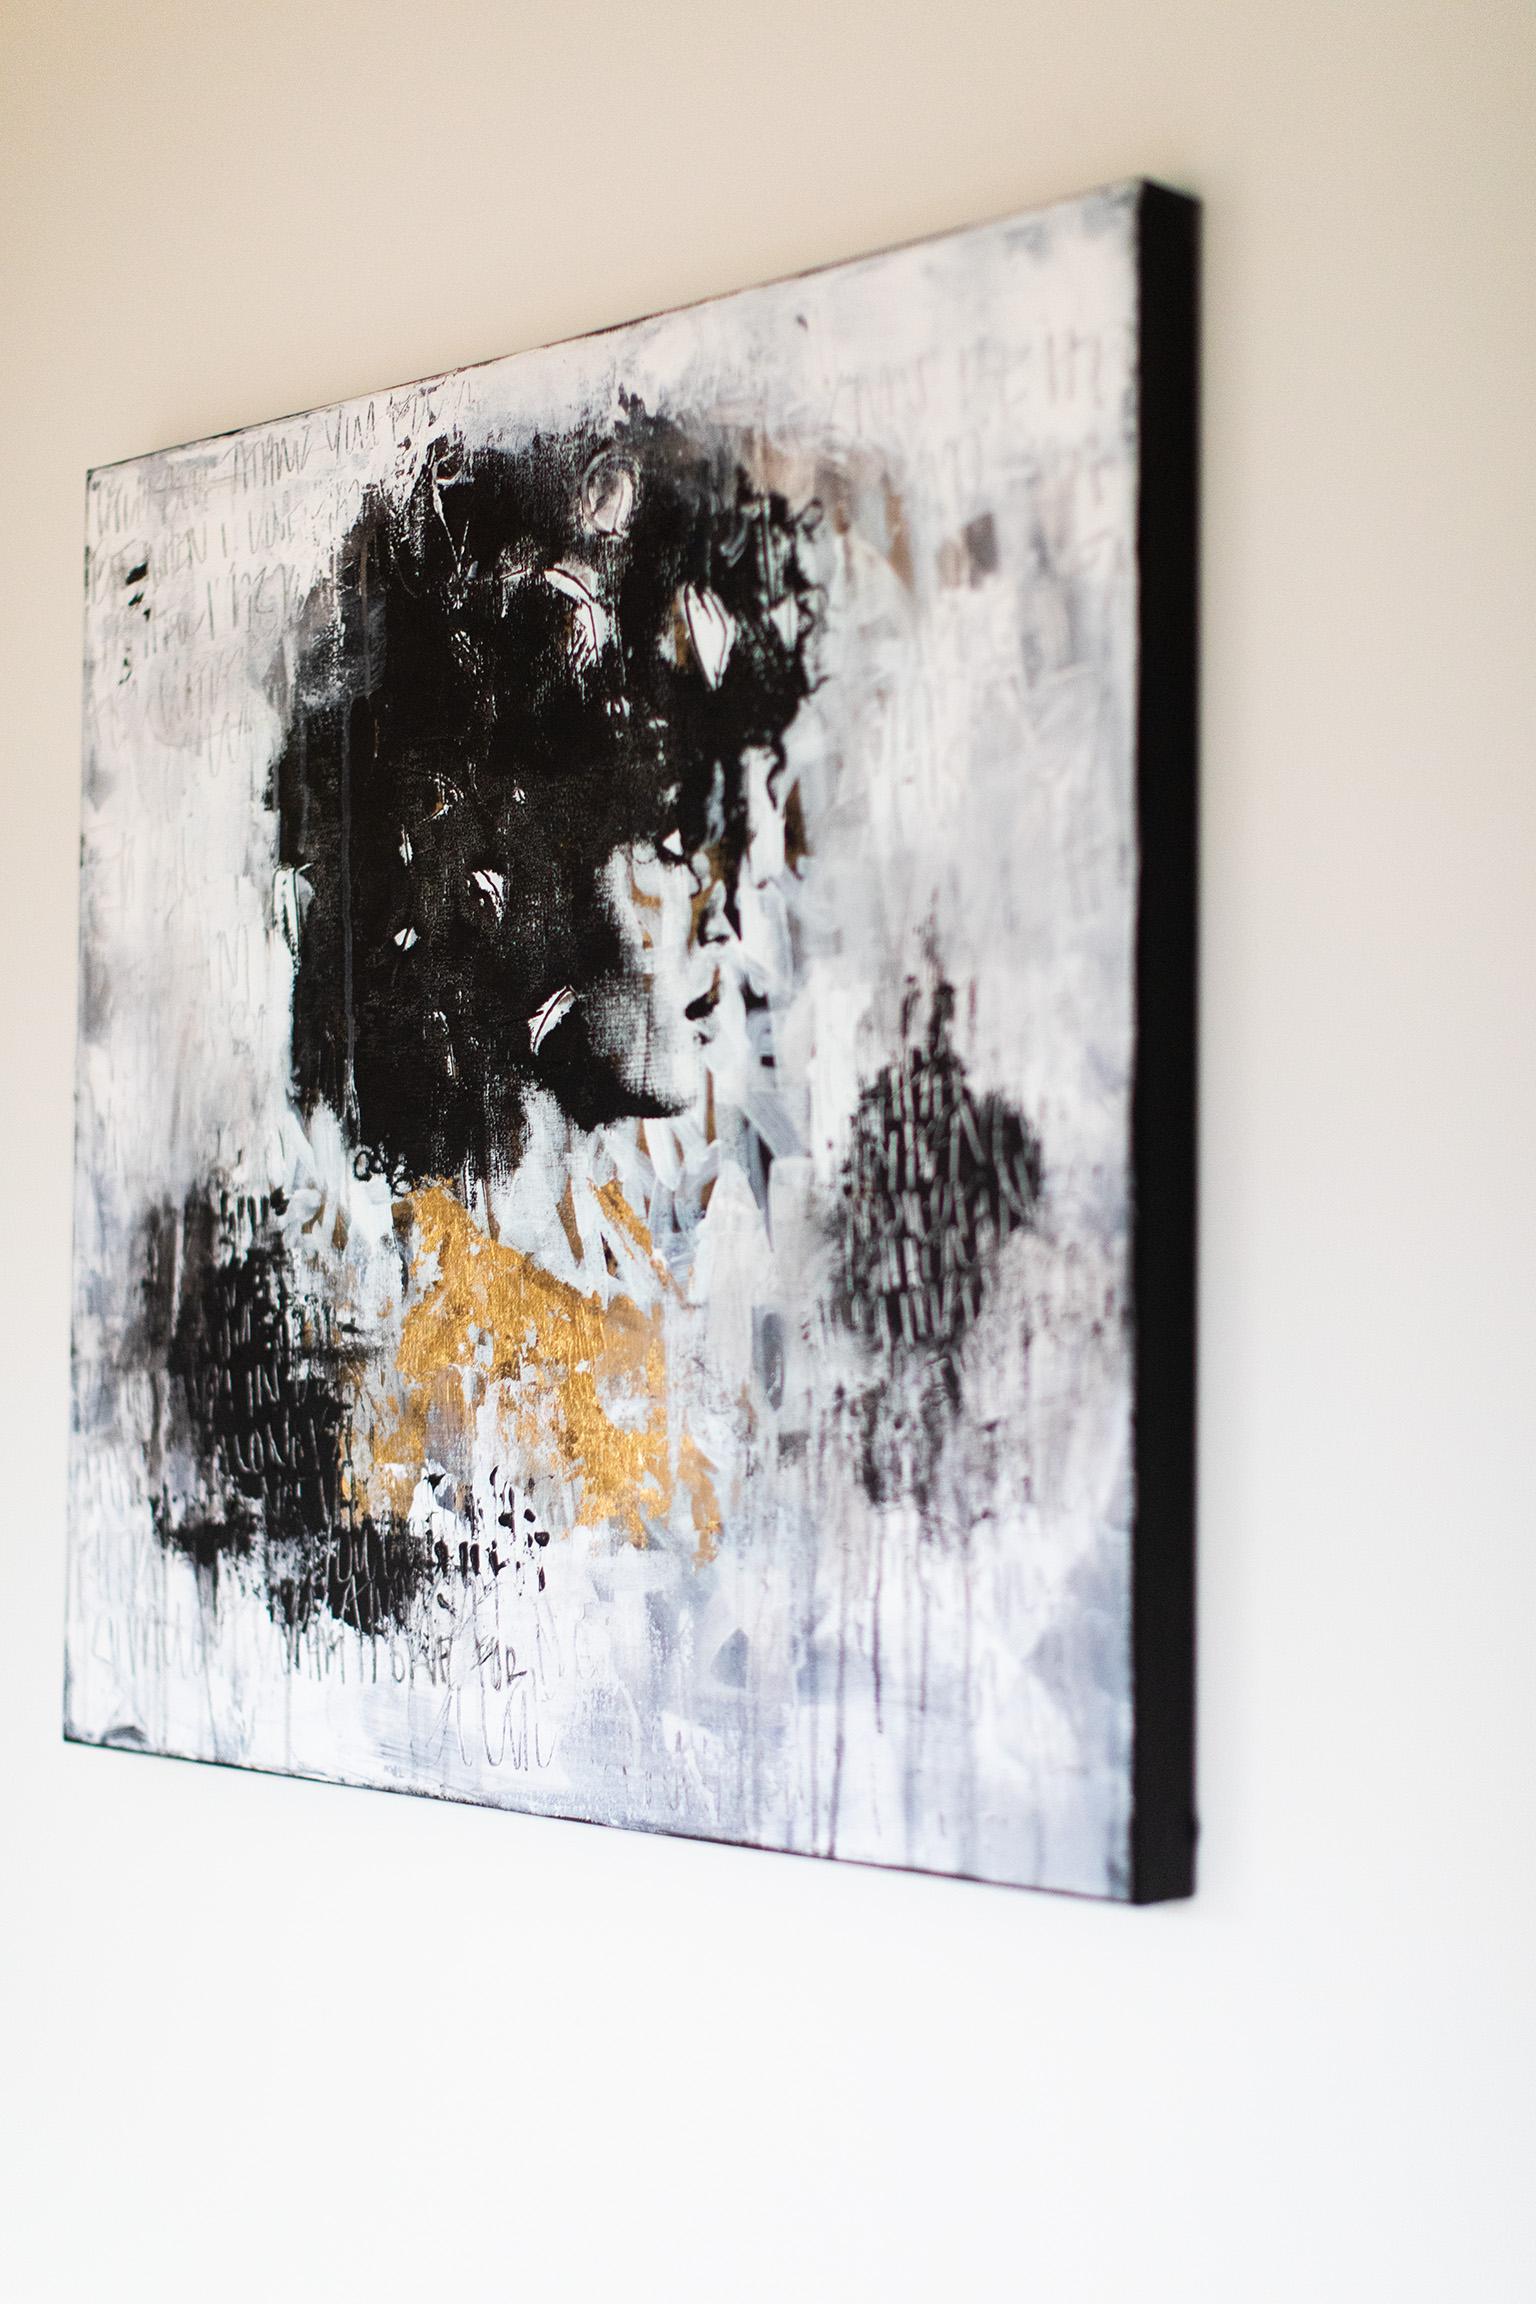 Contemporary Art, Mixed Media Art, Portrait Paintings-Now Turn to the Left

ABOUT THIS PIECE:
“Now turn to the left, (Cortney-A4)” is mixed media street art by Addison Jones featuring her own portrait photography. It’s produced using gold leaf on